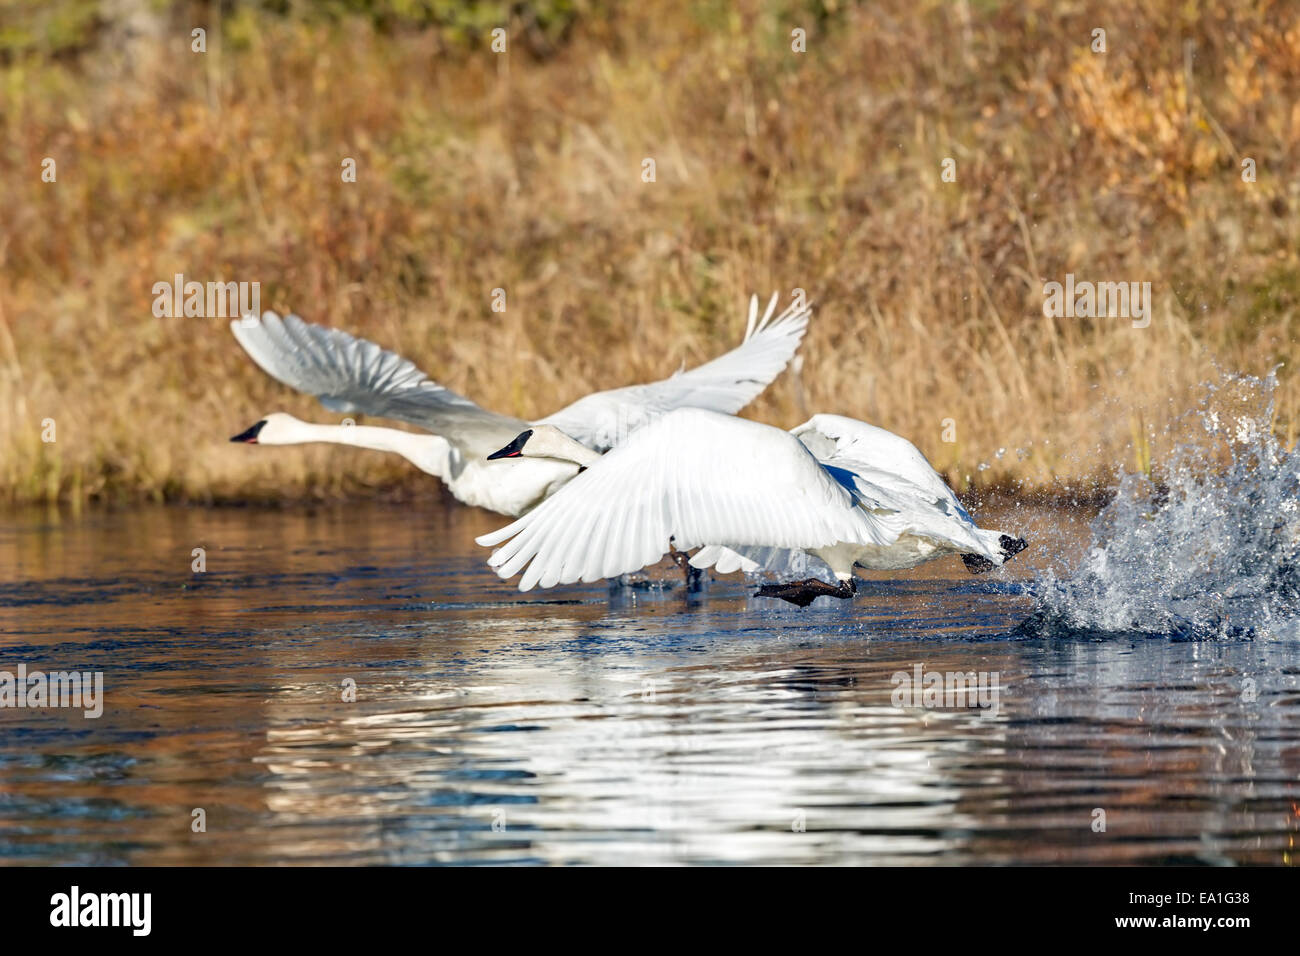 A pair of Trumpeter swan (Cygnus buccinator) take off from a beaver pond in Alaska Stock Photo